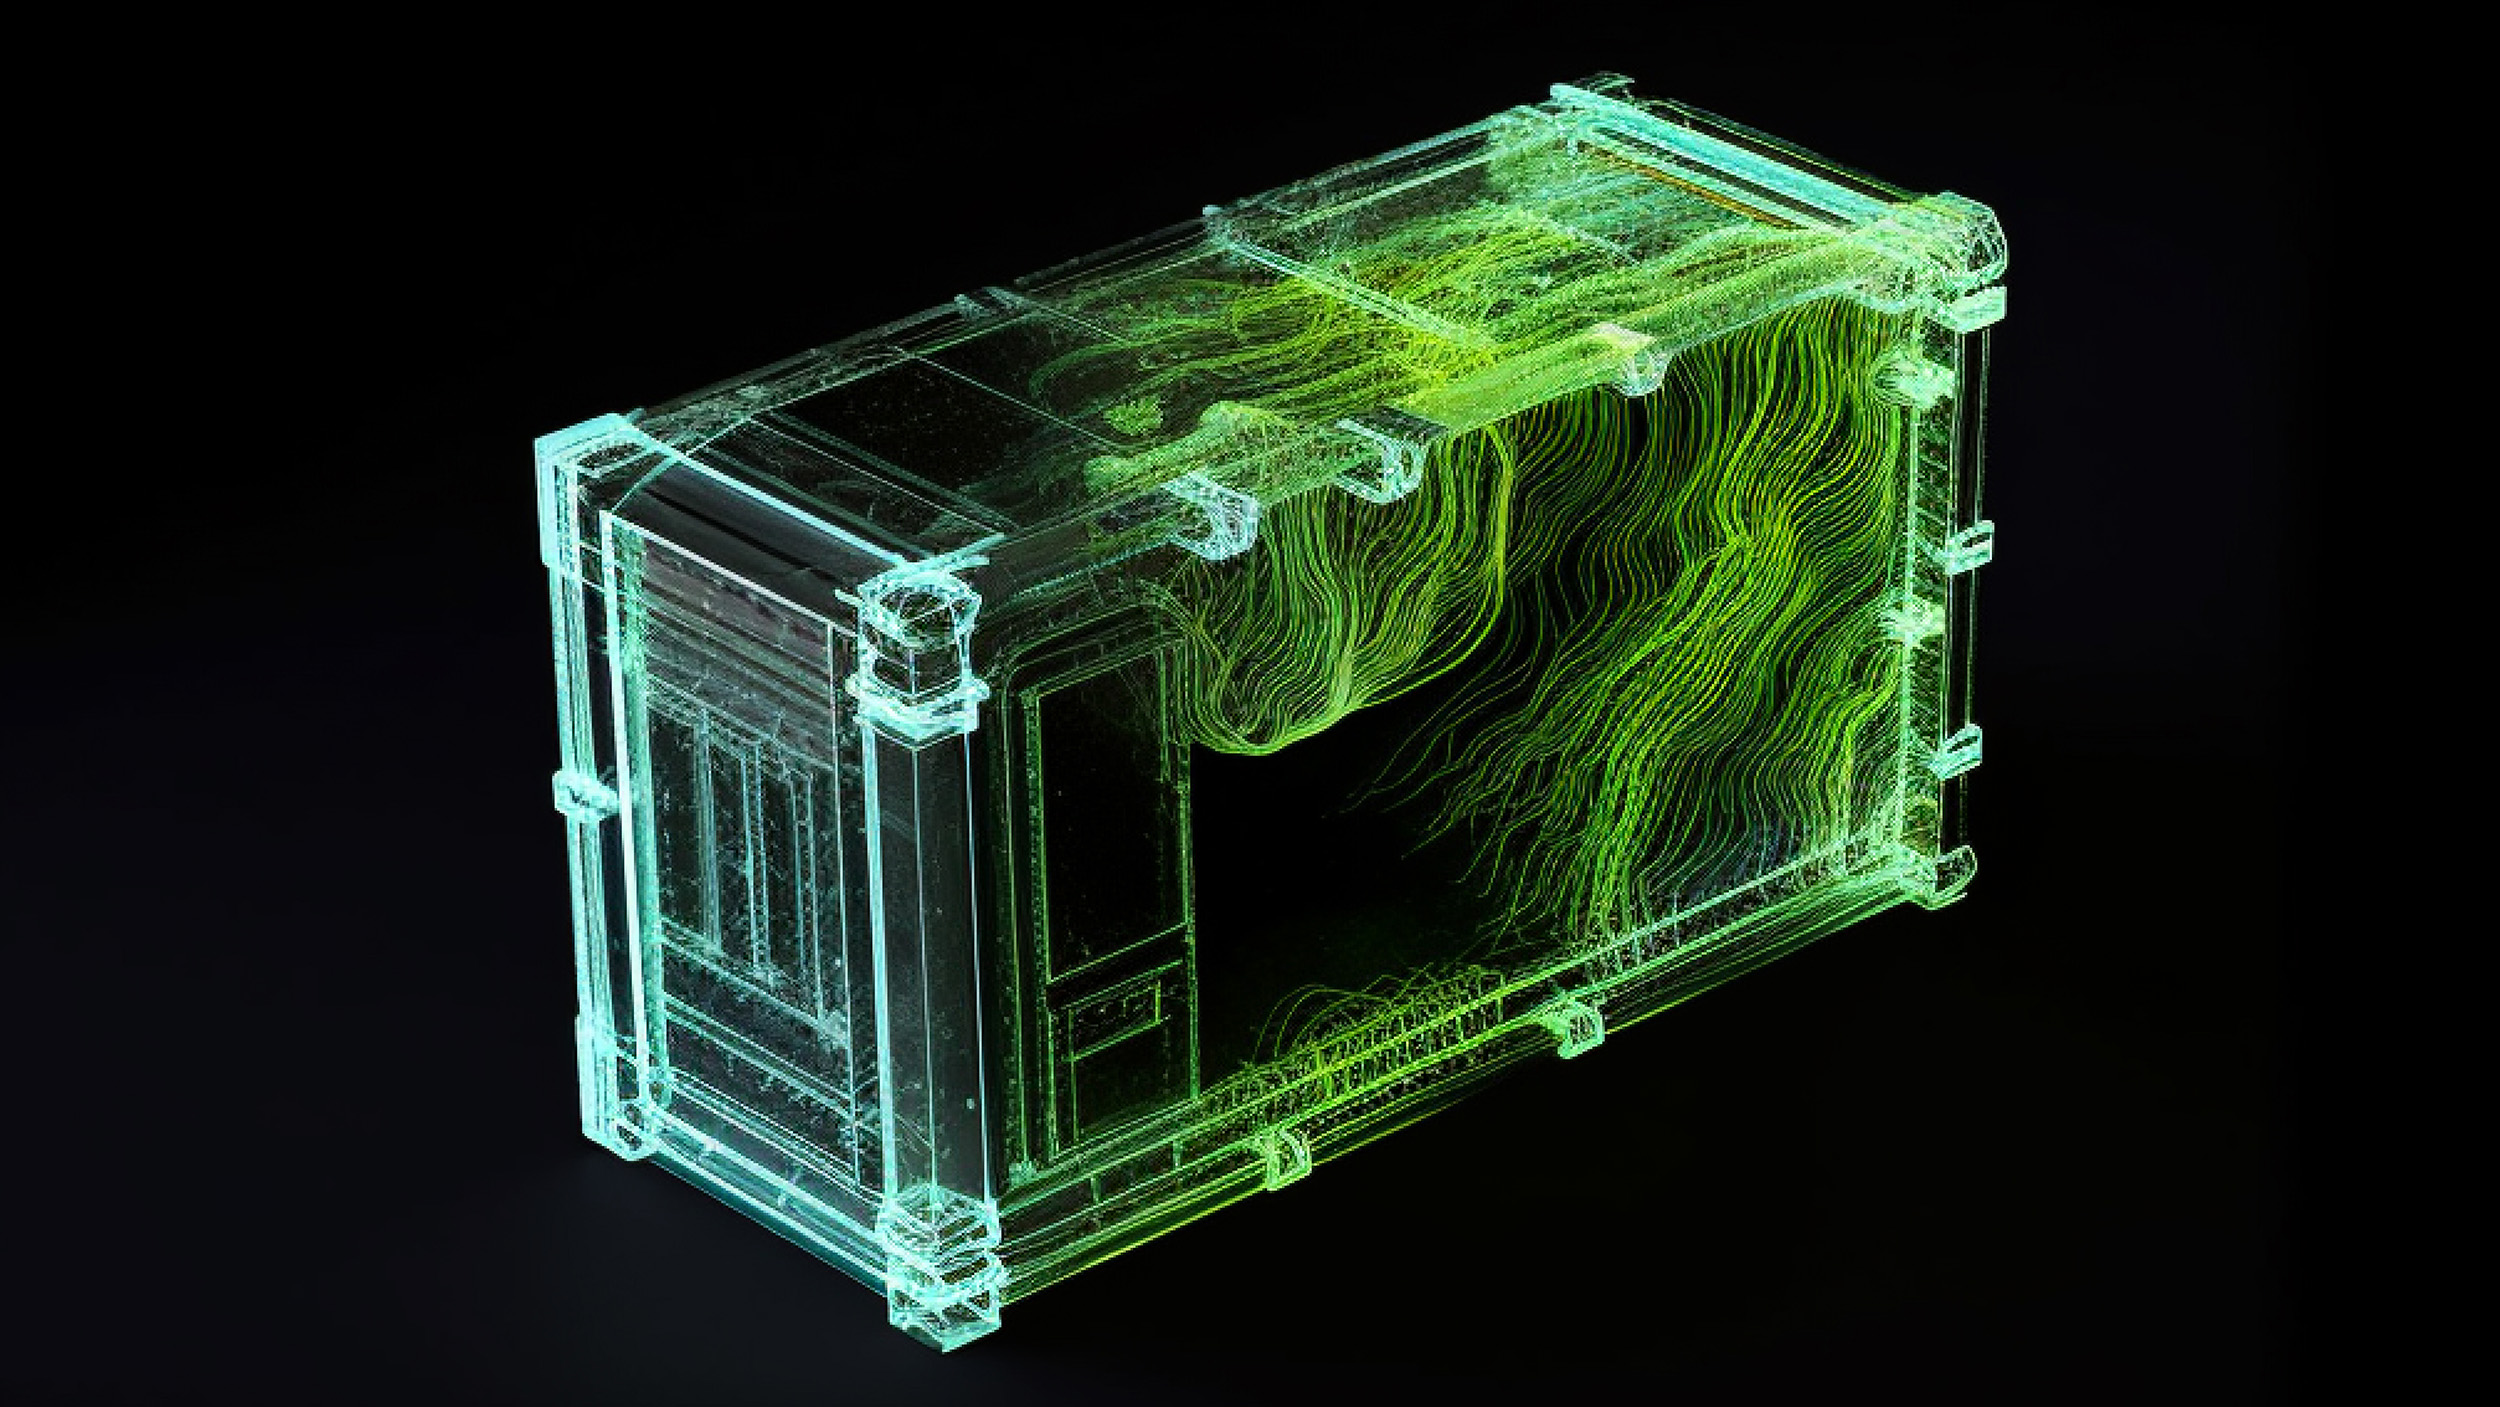 A digitally rendered image of a battery with glowing green details, depicted in a futuristic style.